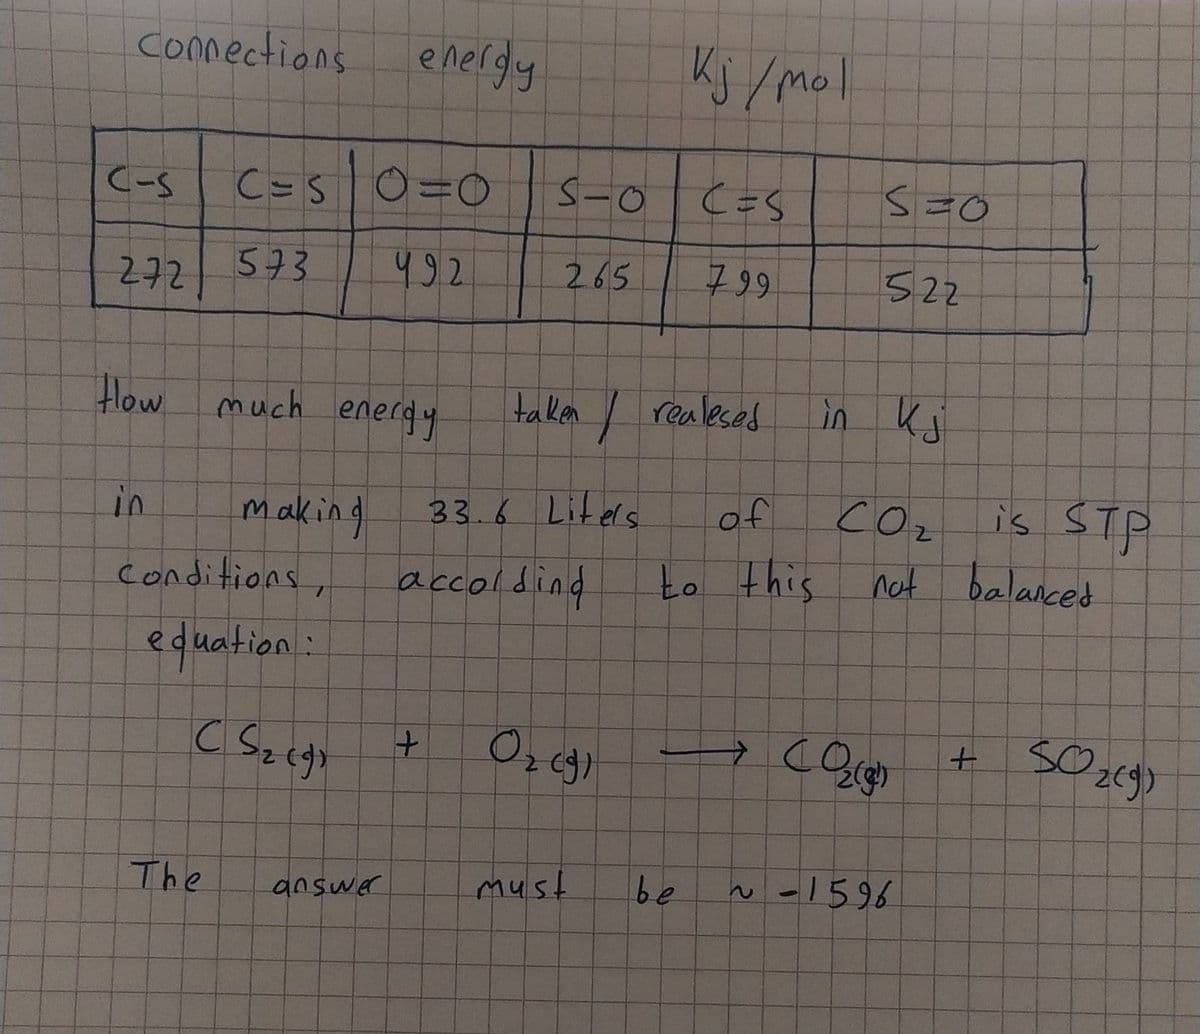 Connections
energly
Kj /mol
C=S0=0
てきS
S=0
272
573
492
265
799
522
How much enerdy
taken I realesed
in kj
is STP
balanced
in
making
33.6 Litels
of
COz
conditions,
accolding
to this net
equation:
The
answer
must
be
N-1596
